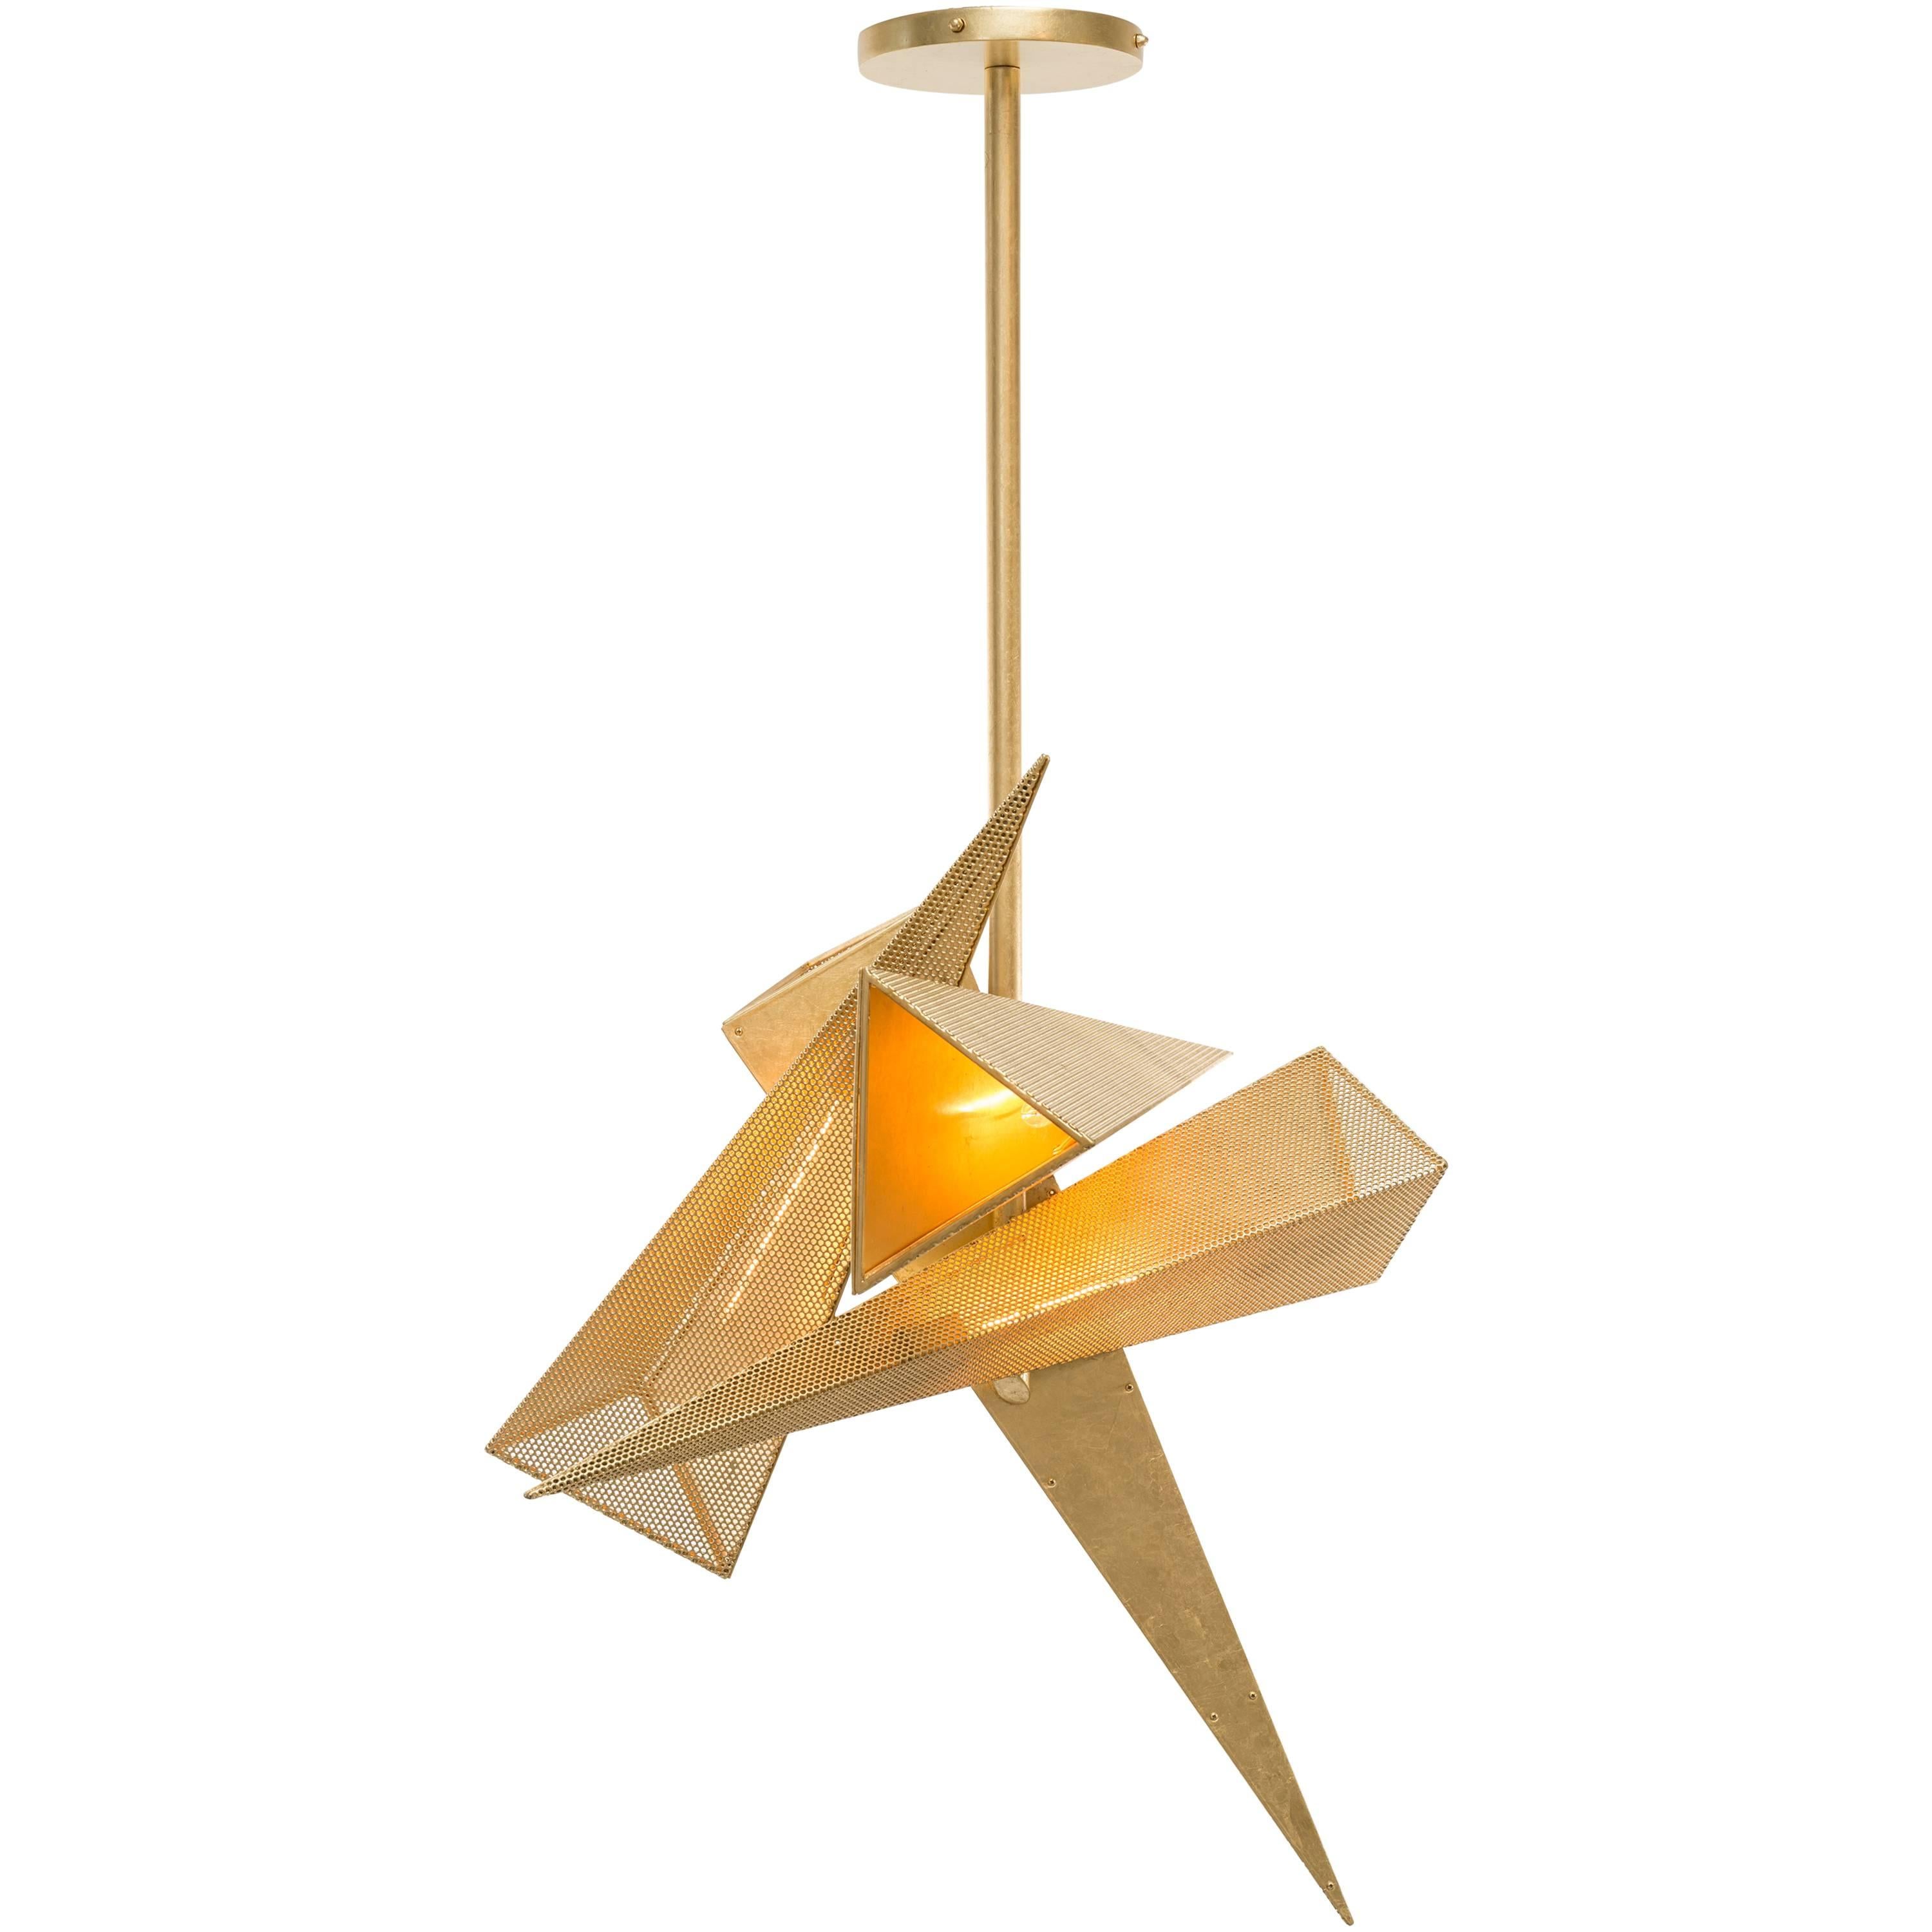 TRYSTAN CHANDELIER - Gold Leafed Perforated Steel Pyramids